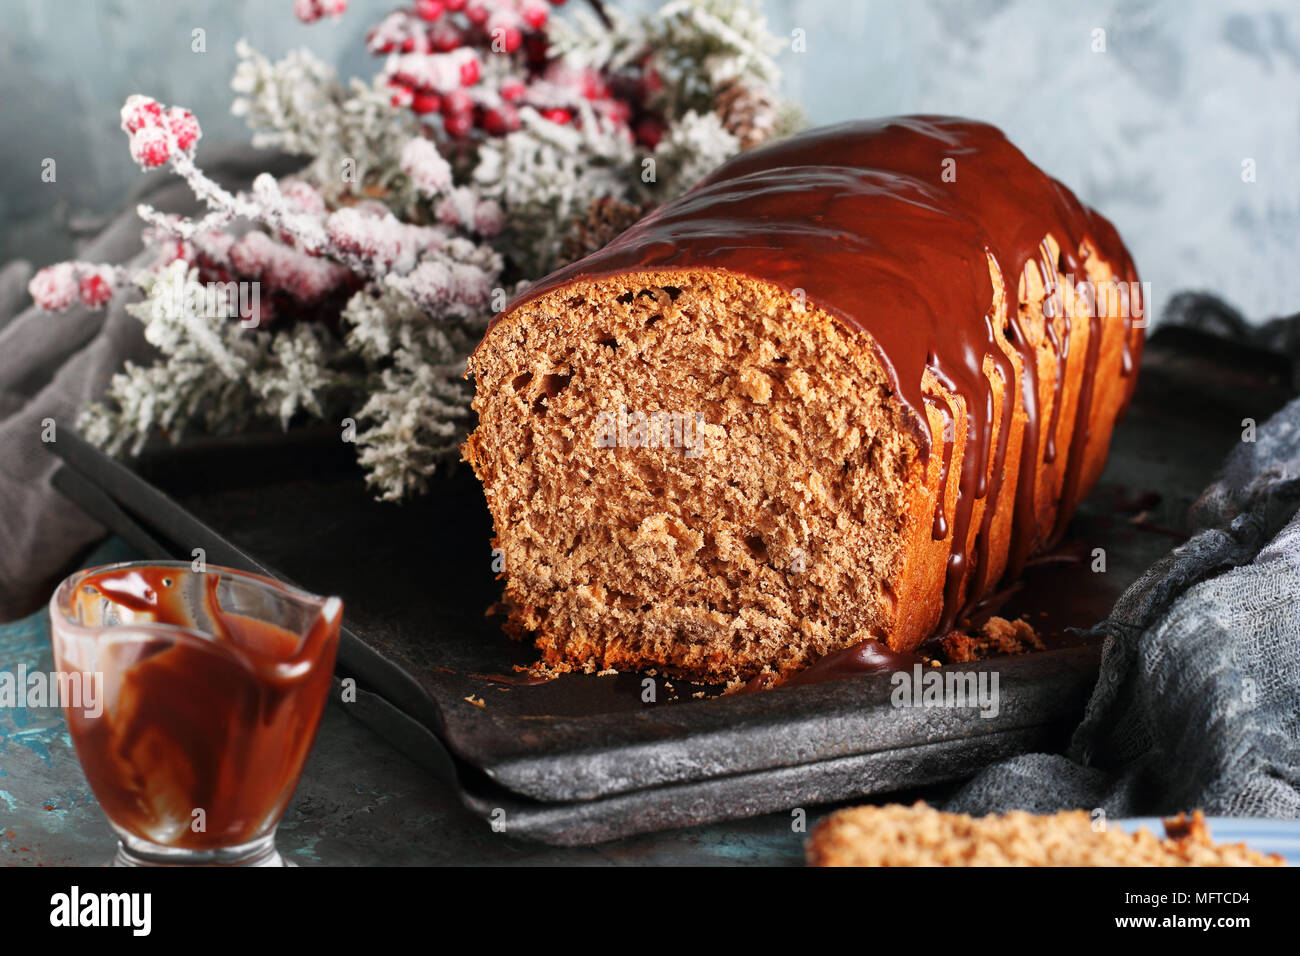 cut of homemade chocolate bread with chocolate icing, in New Year's decorations Stock Photo